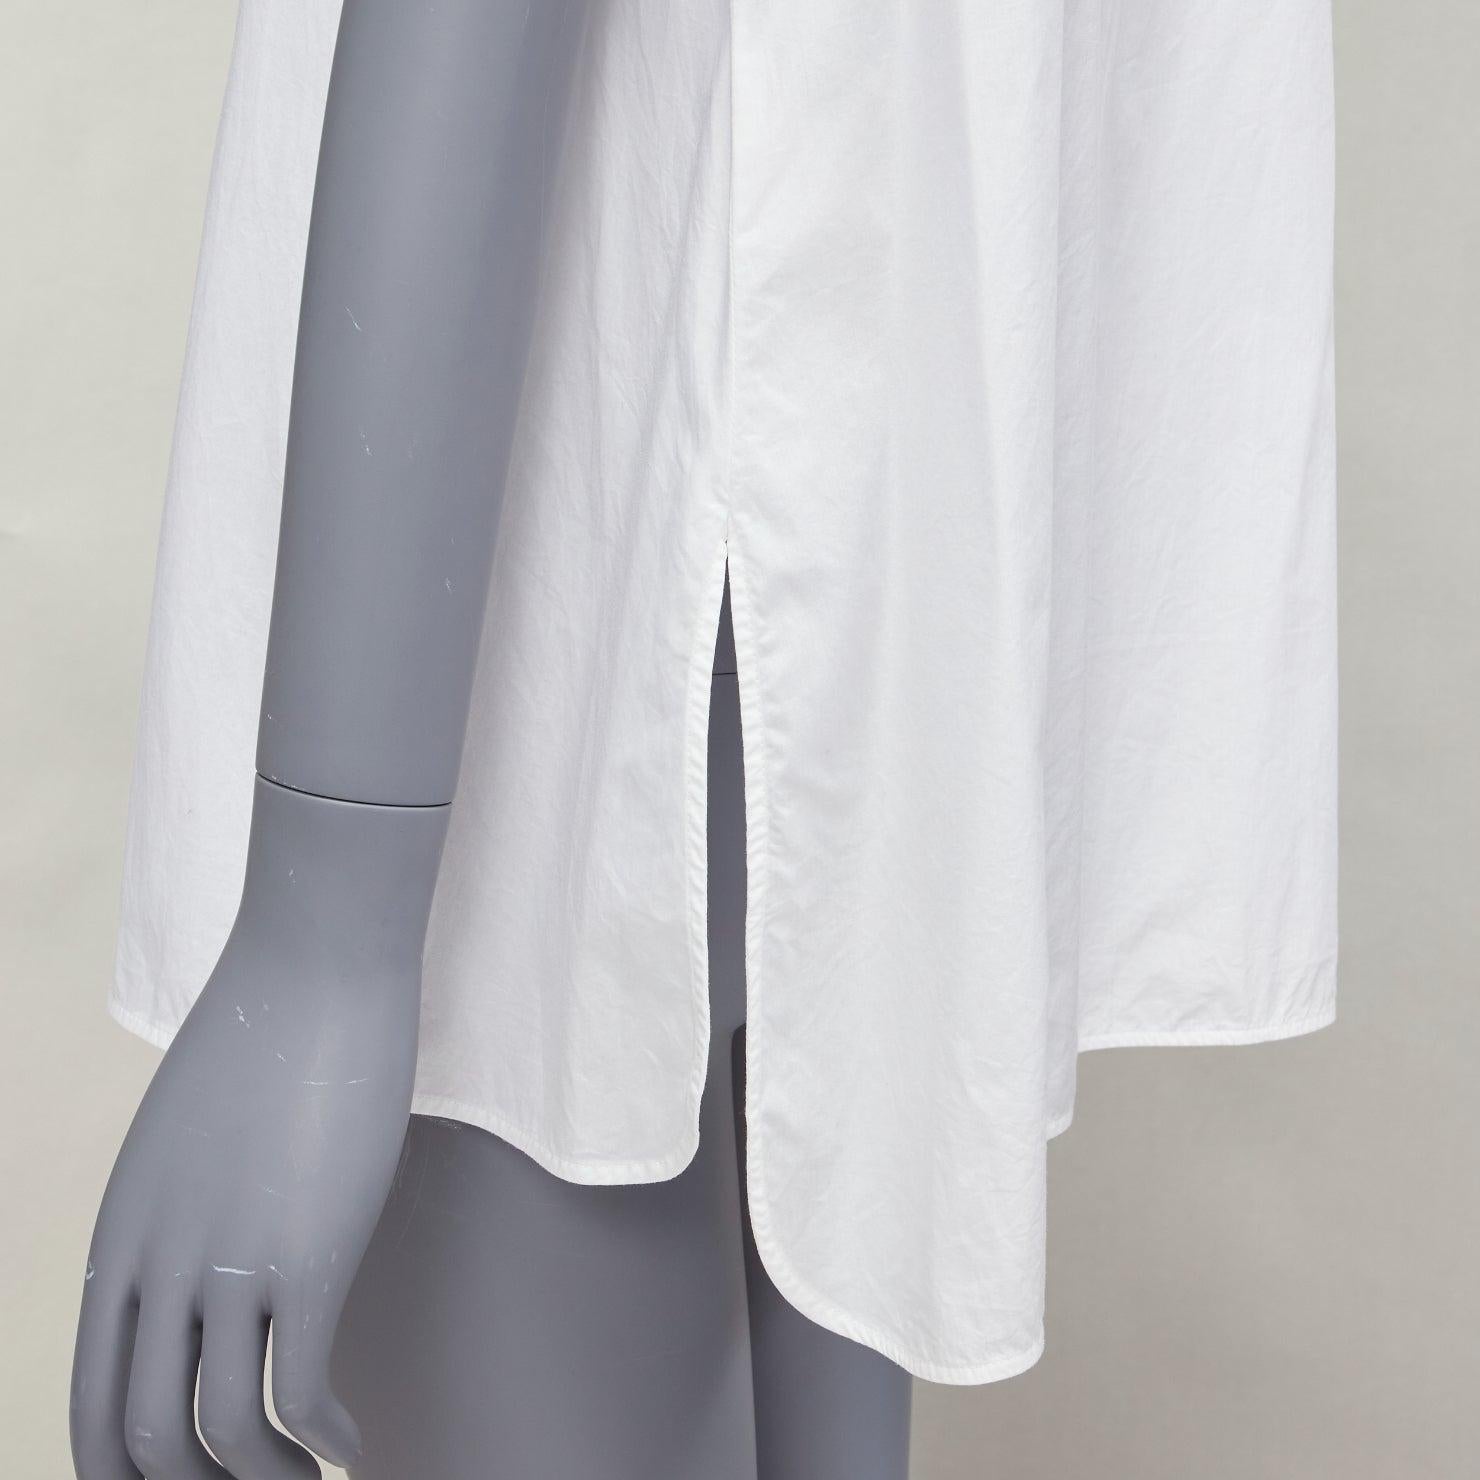 ACNE STUDIOS white cotton minimal sleeveless side slits tunic top FR36 S
Reference: NKLL/A00166
Brand: Acne Studios
Material: Cotton
Color: White
Pattern: Solid
Closure: Button
Extra Details: Side slits.
Made in: Portugal

CONDITION:
Condition: